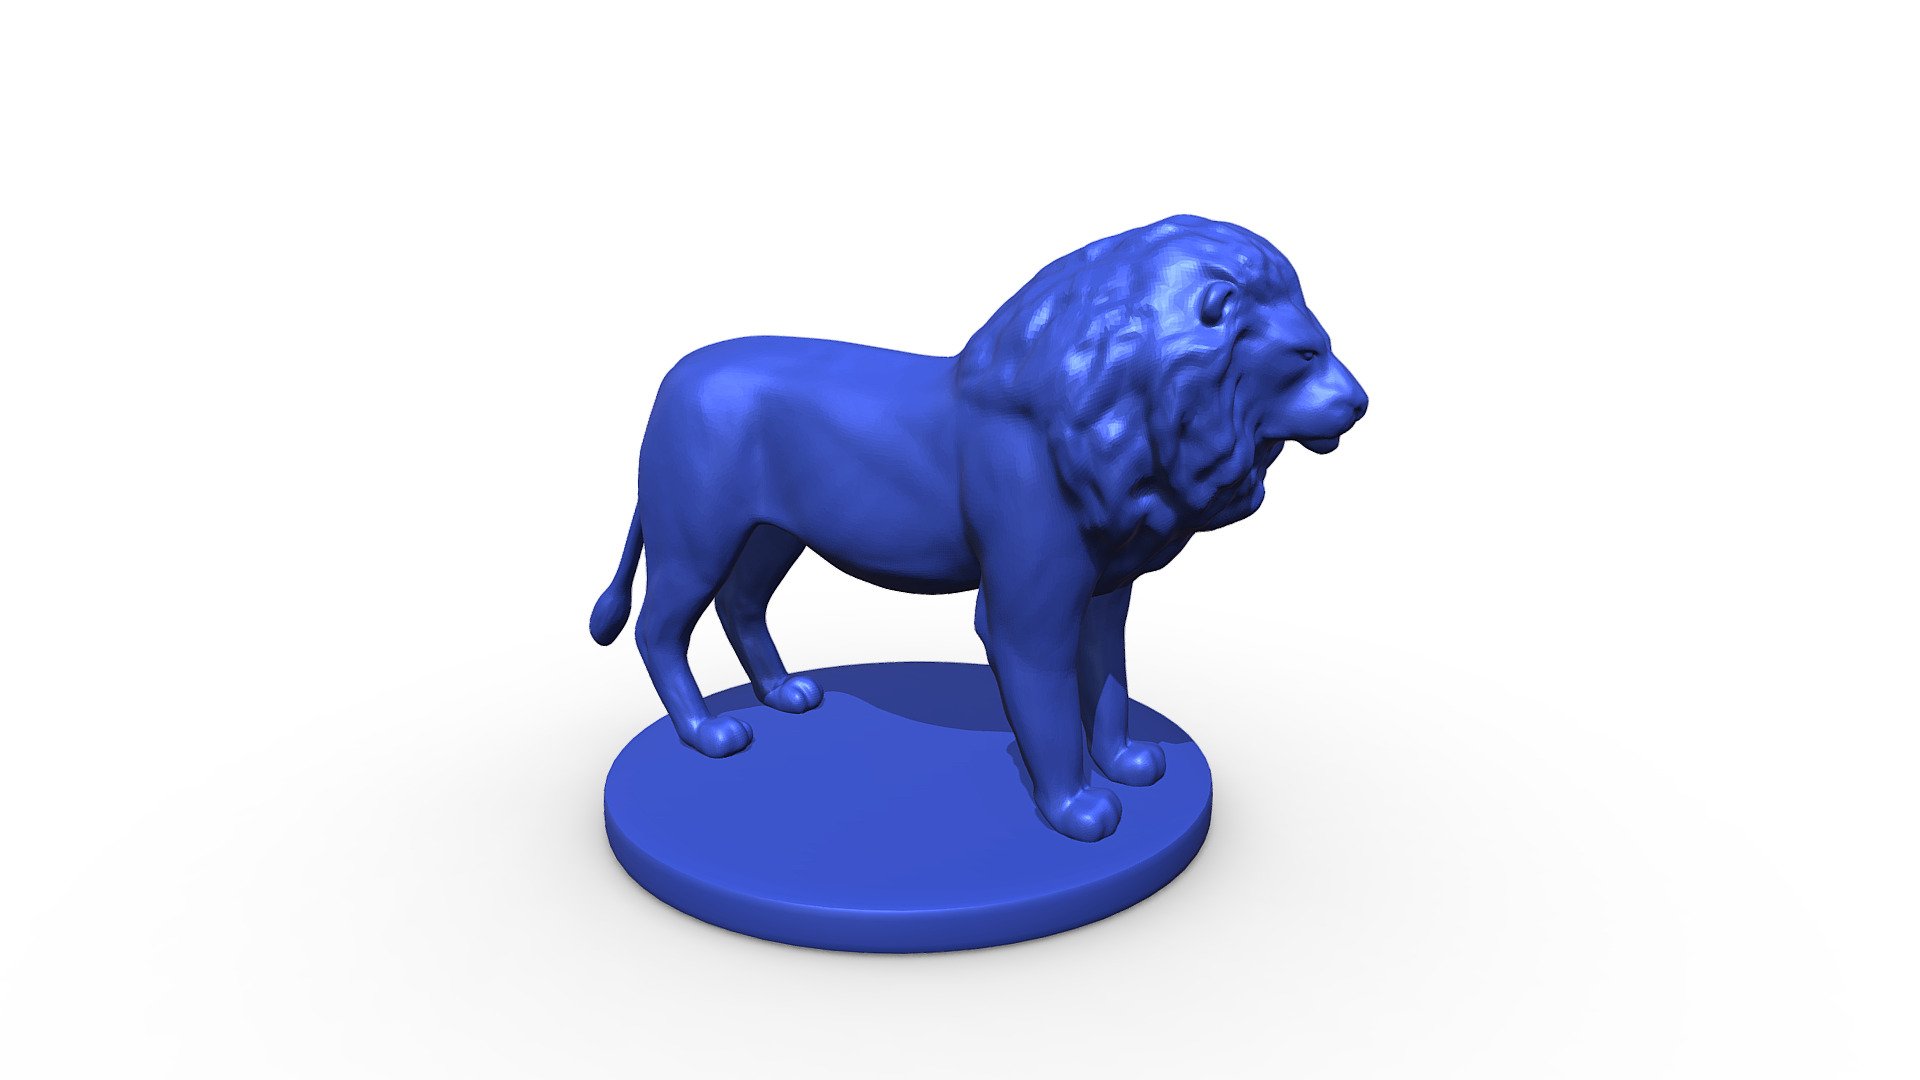 Introducing the majestic Wild Animal Lion, now available as a captivating printable 3D model. With its commanding presence and iconic mane, the lion symbolizes strength, courage, and royalty in the wild.

Crafted with meticulous attention to detail, our Wild Animal Lion printable 3D model captures the essence of this iconic creature in stunning realism. From its powerful physique and noble features to its piercing gaze and flowing mane, every aspect of the lion is faithfully reproduced, allowing you to experience the raw power and beauty of nature up close.

Immerse yourself in the awe-inspiring world of the Wild Animal Lion and bring its timeless splendor to life in your physical creations today. Download our printable 3D model and embark on an unforgettable journey into the heart of the African wilderness.


Wildlife #Lion #Nature #Printable #3DModel #Educational #Creativity #Wilderness #HomeDecor - Wild Animal Lion - Buy Royalty Free 3D model by Sujit Mishra (@sujitanshumishra) 3d model